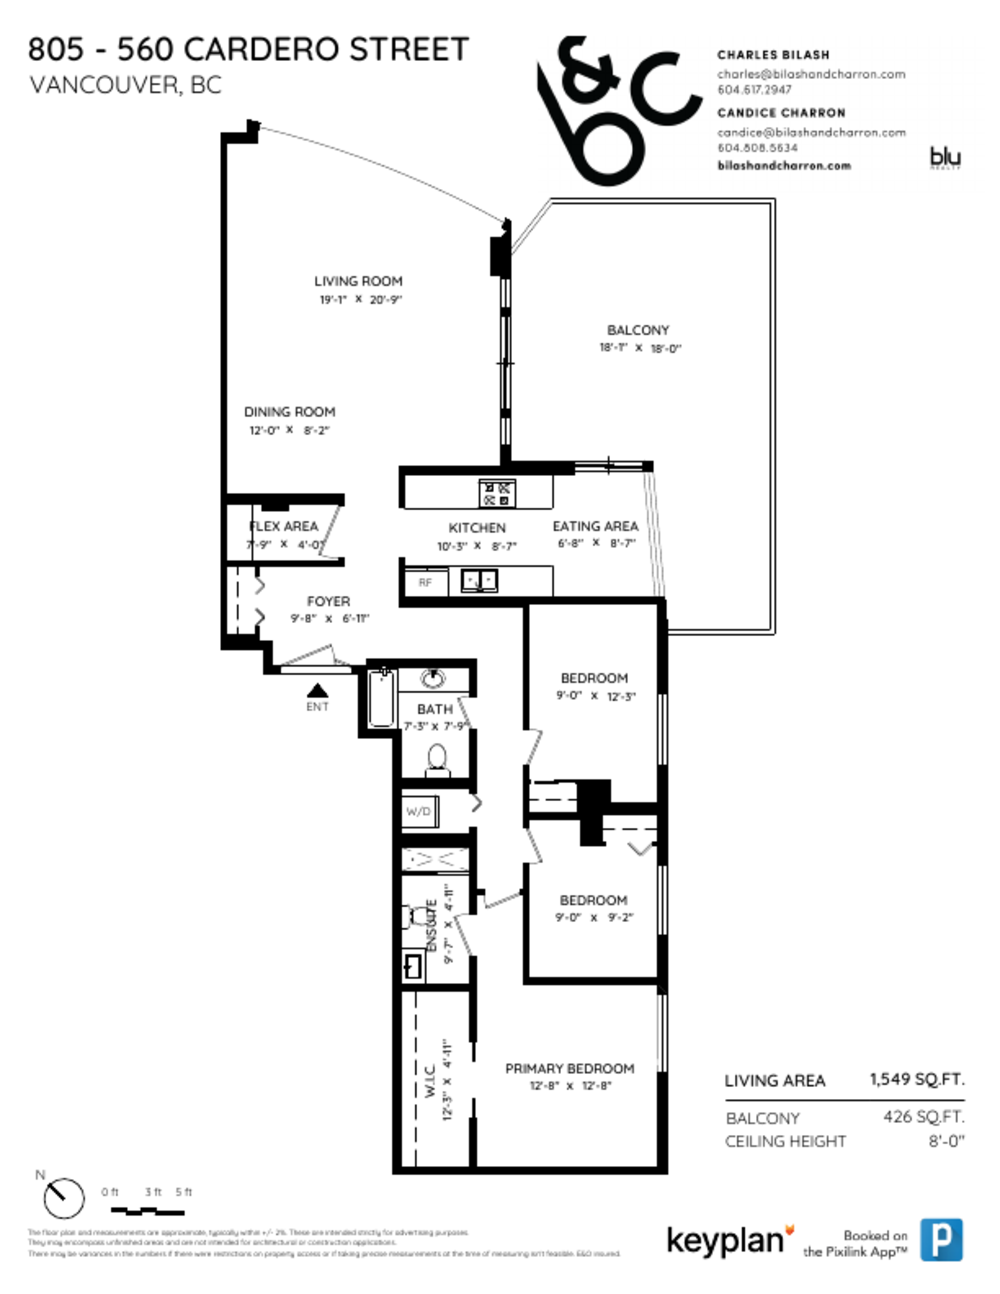 Floor Plan for a 3 Bedroom Apartment in Vancouver